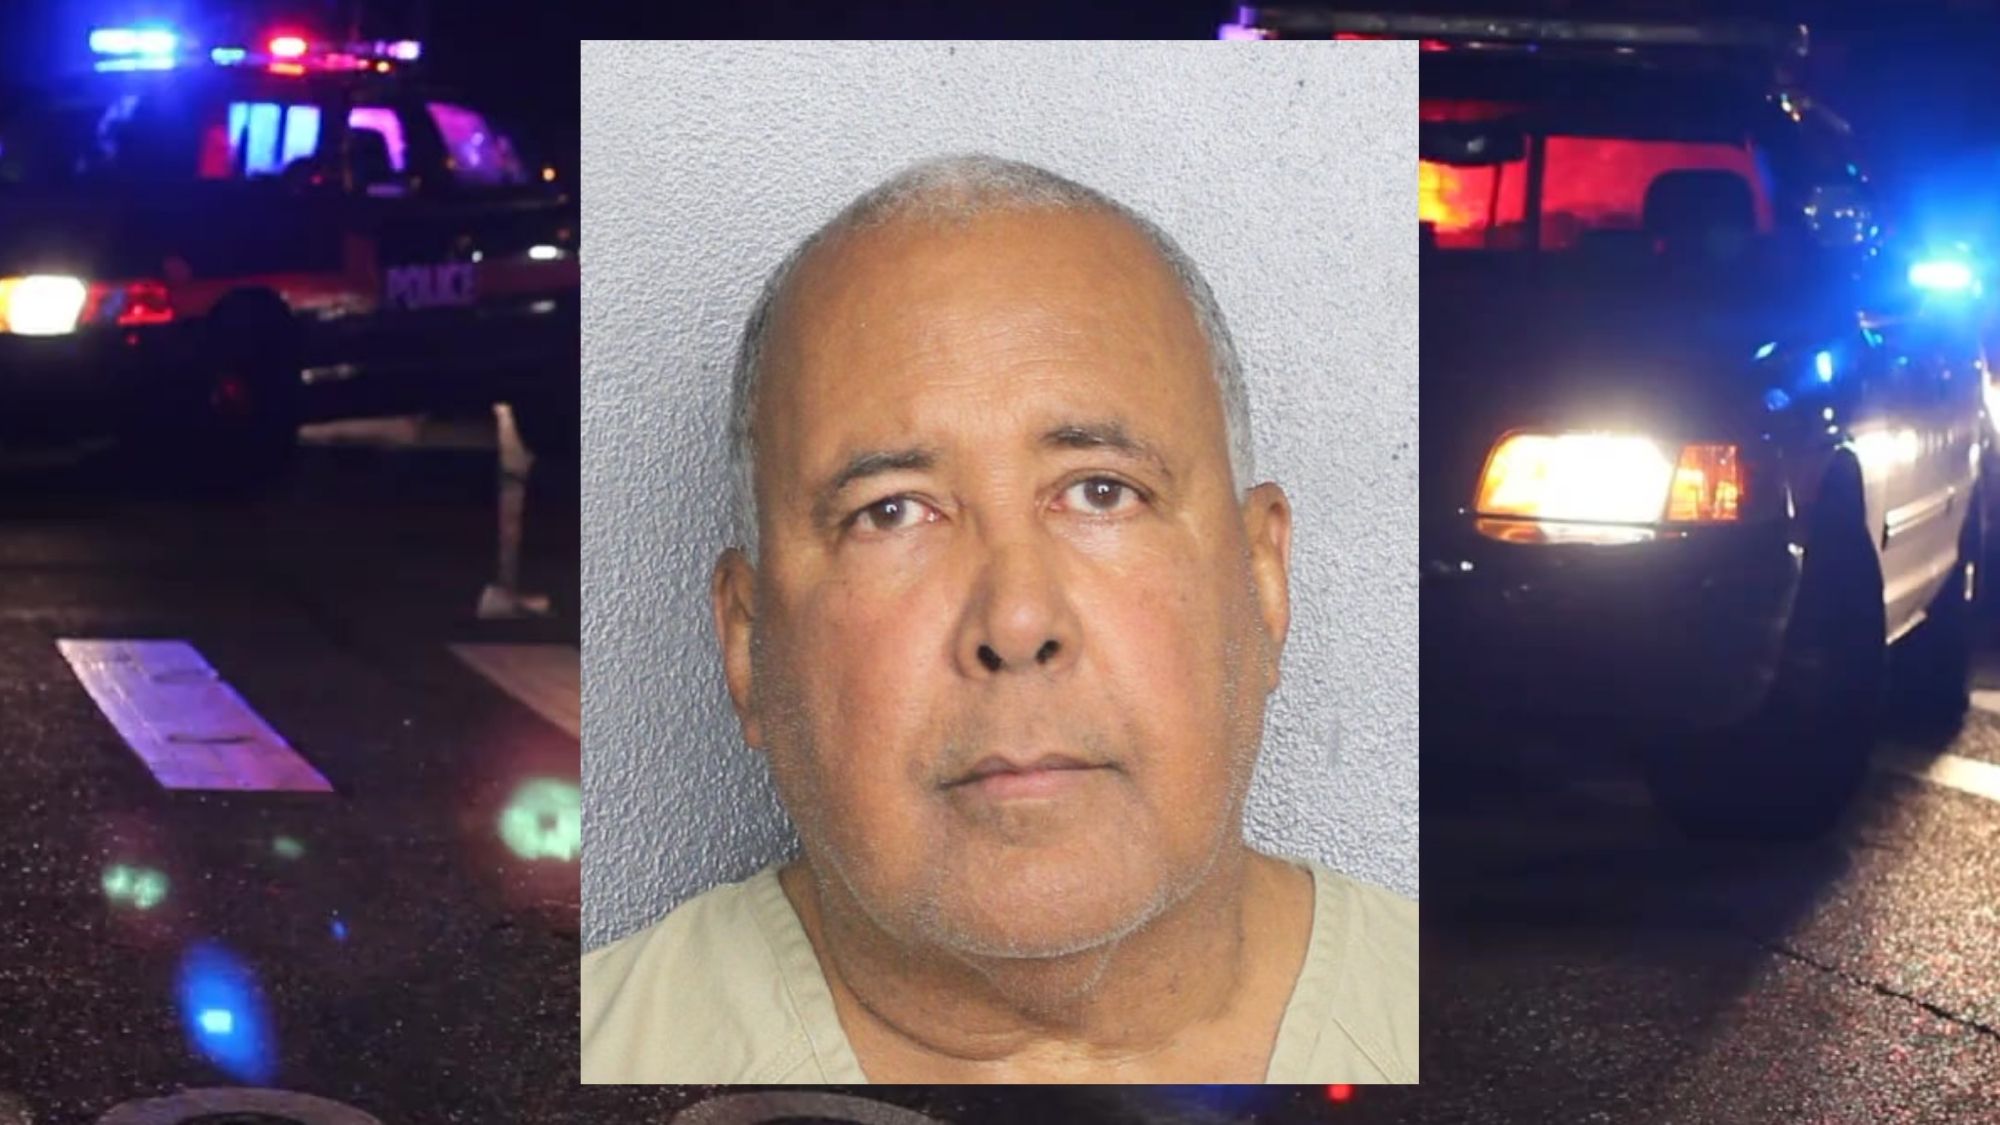 Tamarac Man’s Frustration with Immigration Approval Leads to Domestic Violence and Deadly Weapon Assault